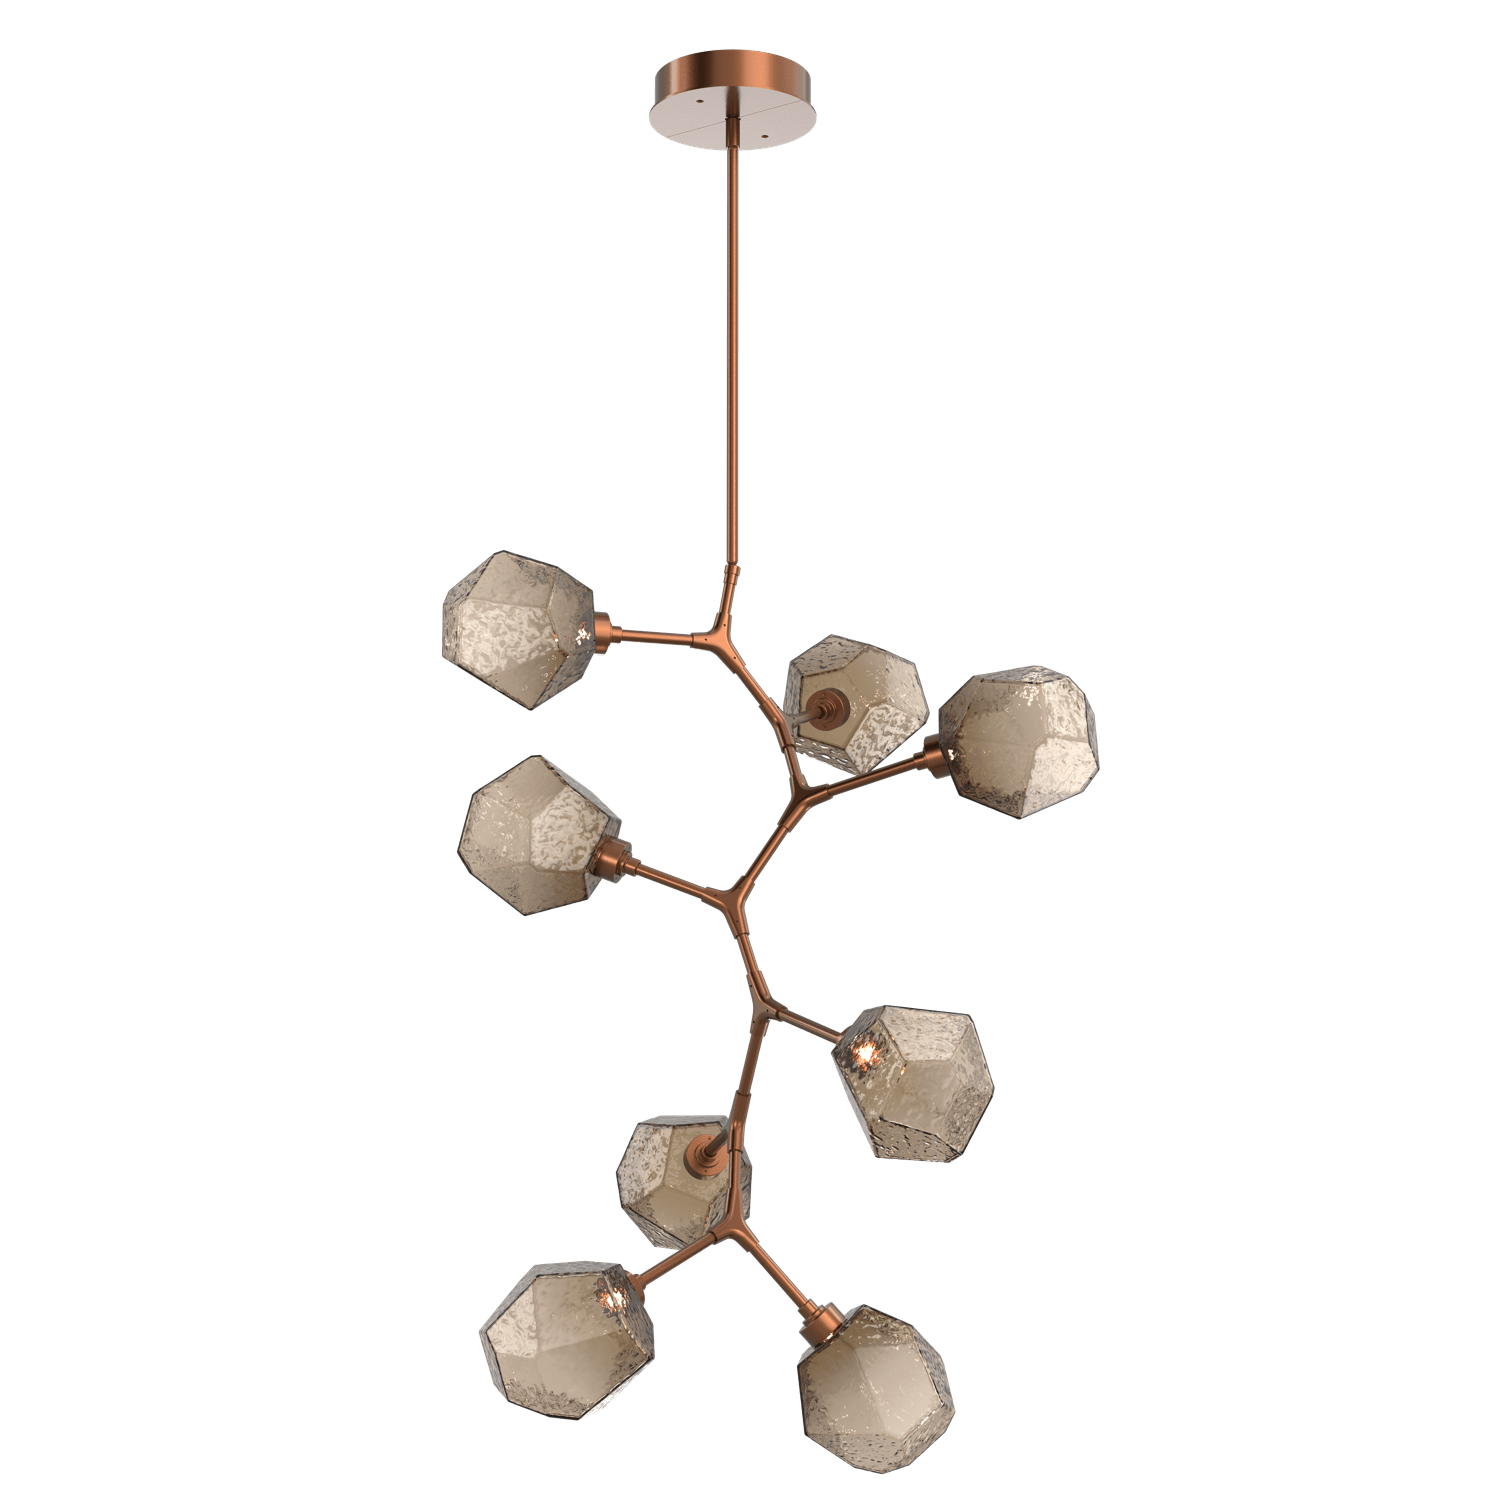 CHB0039-VB-BB-B-Hammerton-Studio-Gem-8-light-modern-vine-chandelier-with-burnished-bronze-finish-and-bronze-blown-glass-shades-and-LED-lamping